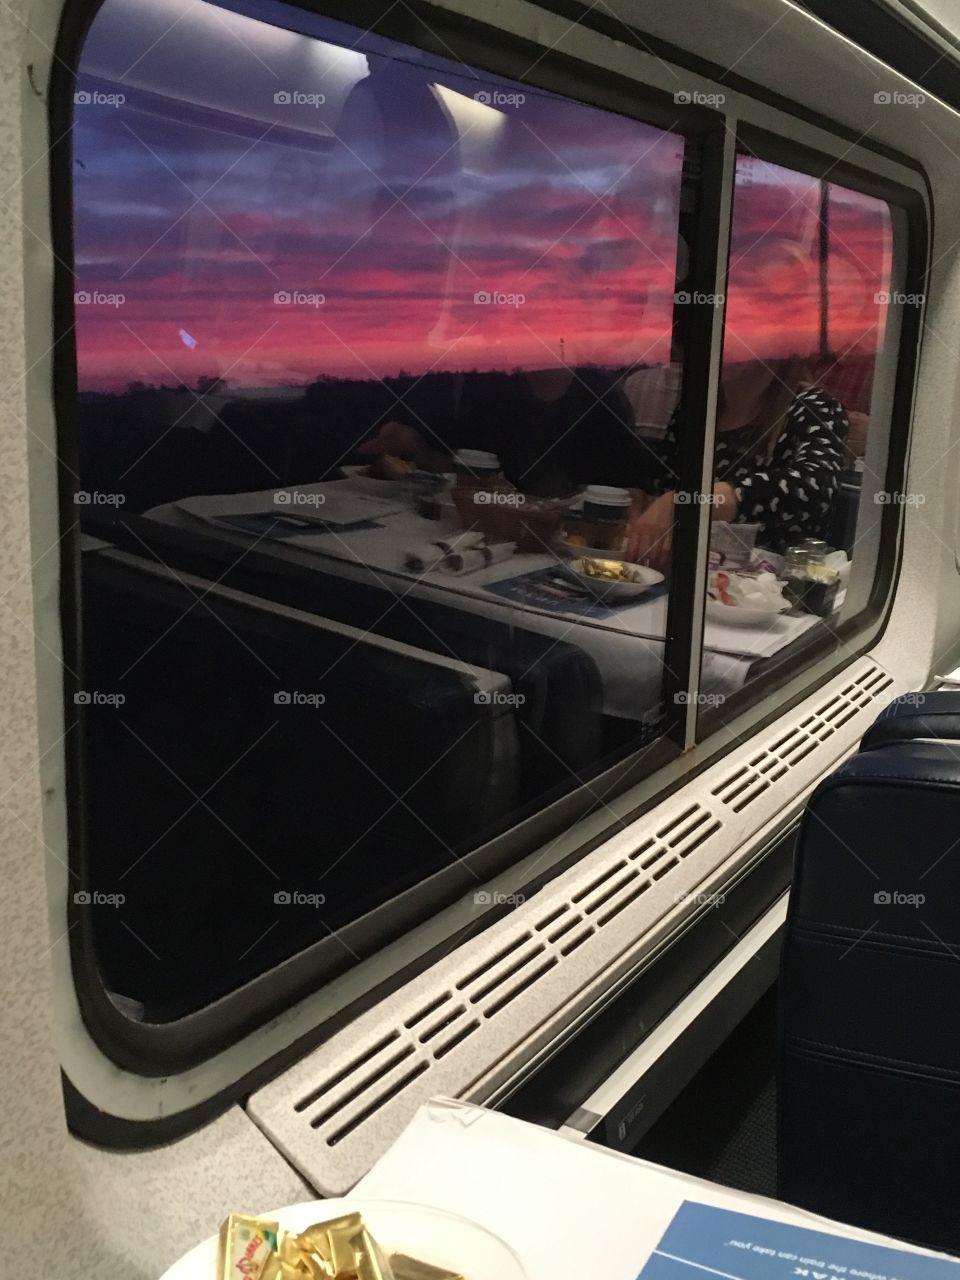 Beautiful sunrise on a train ride to vacation.